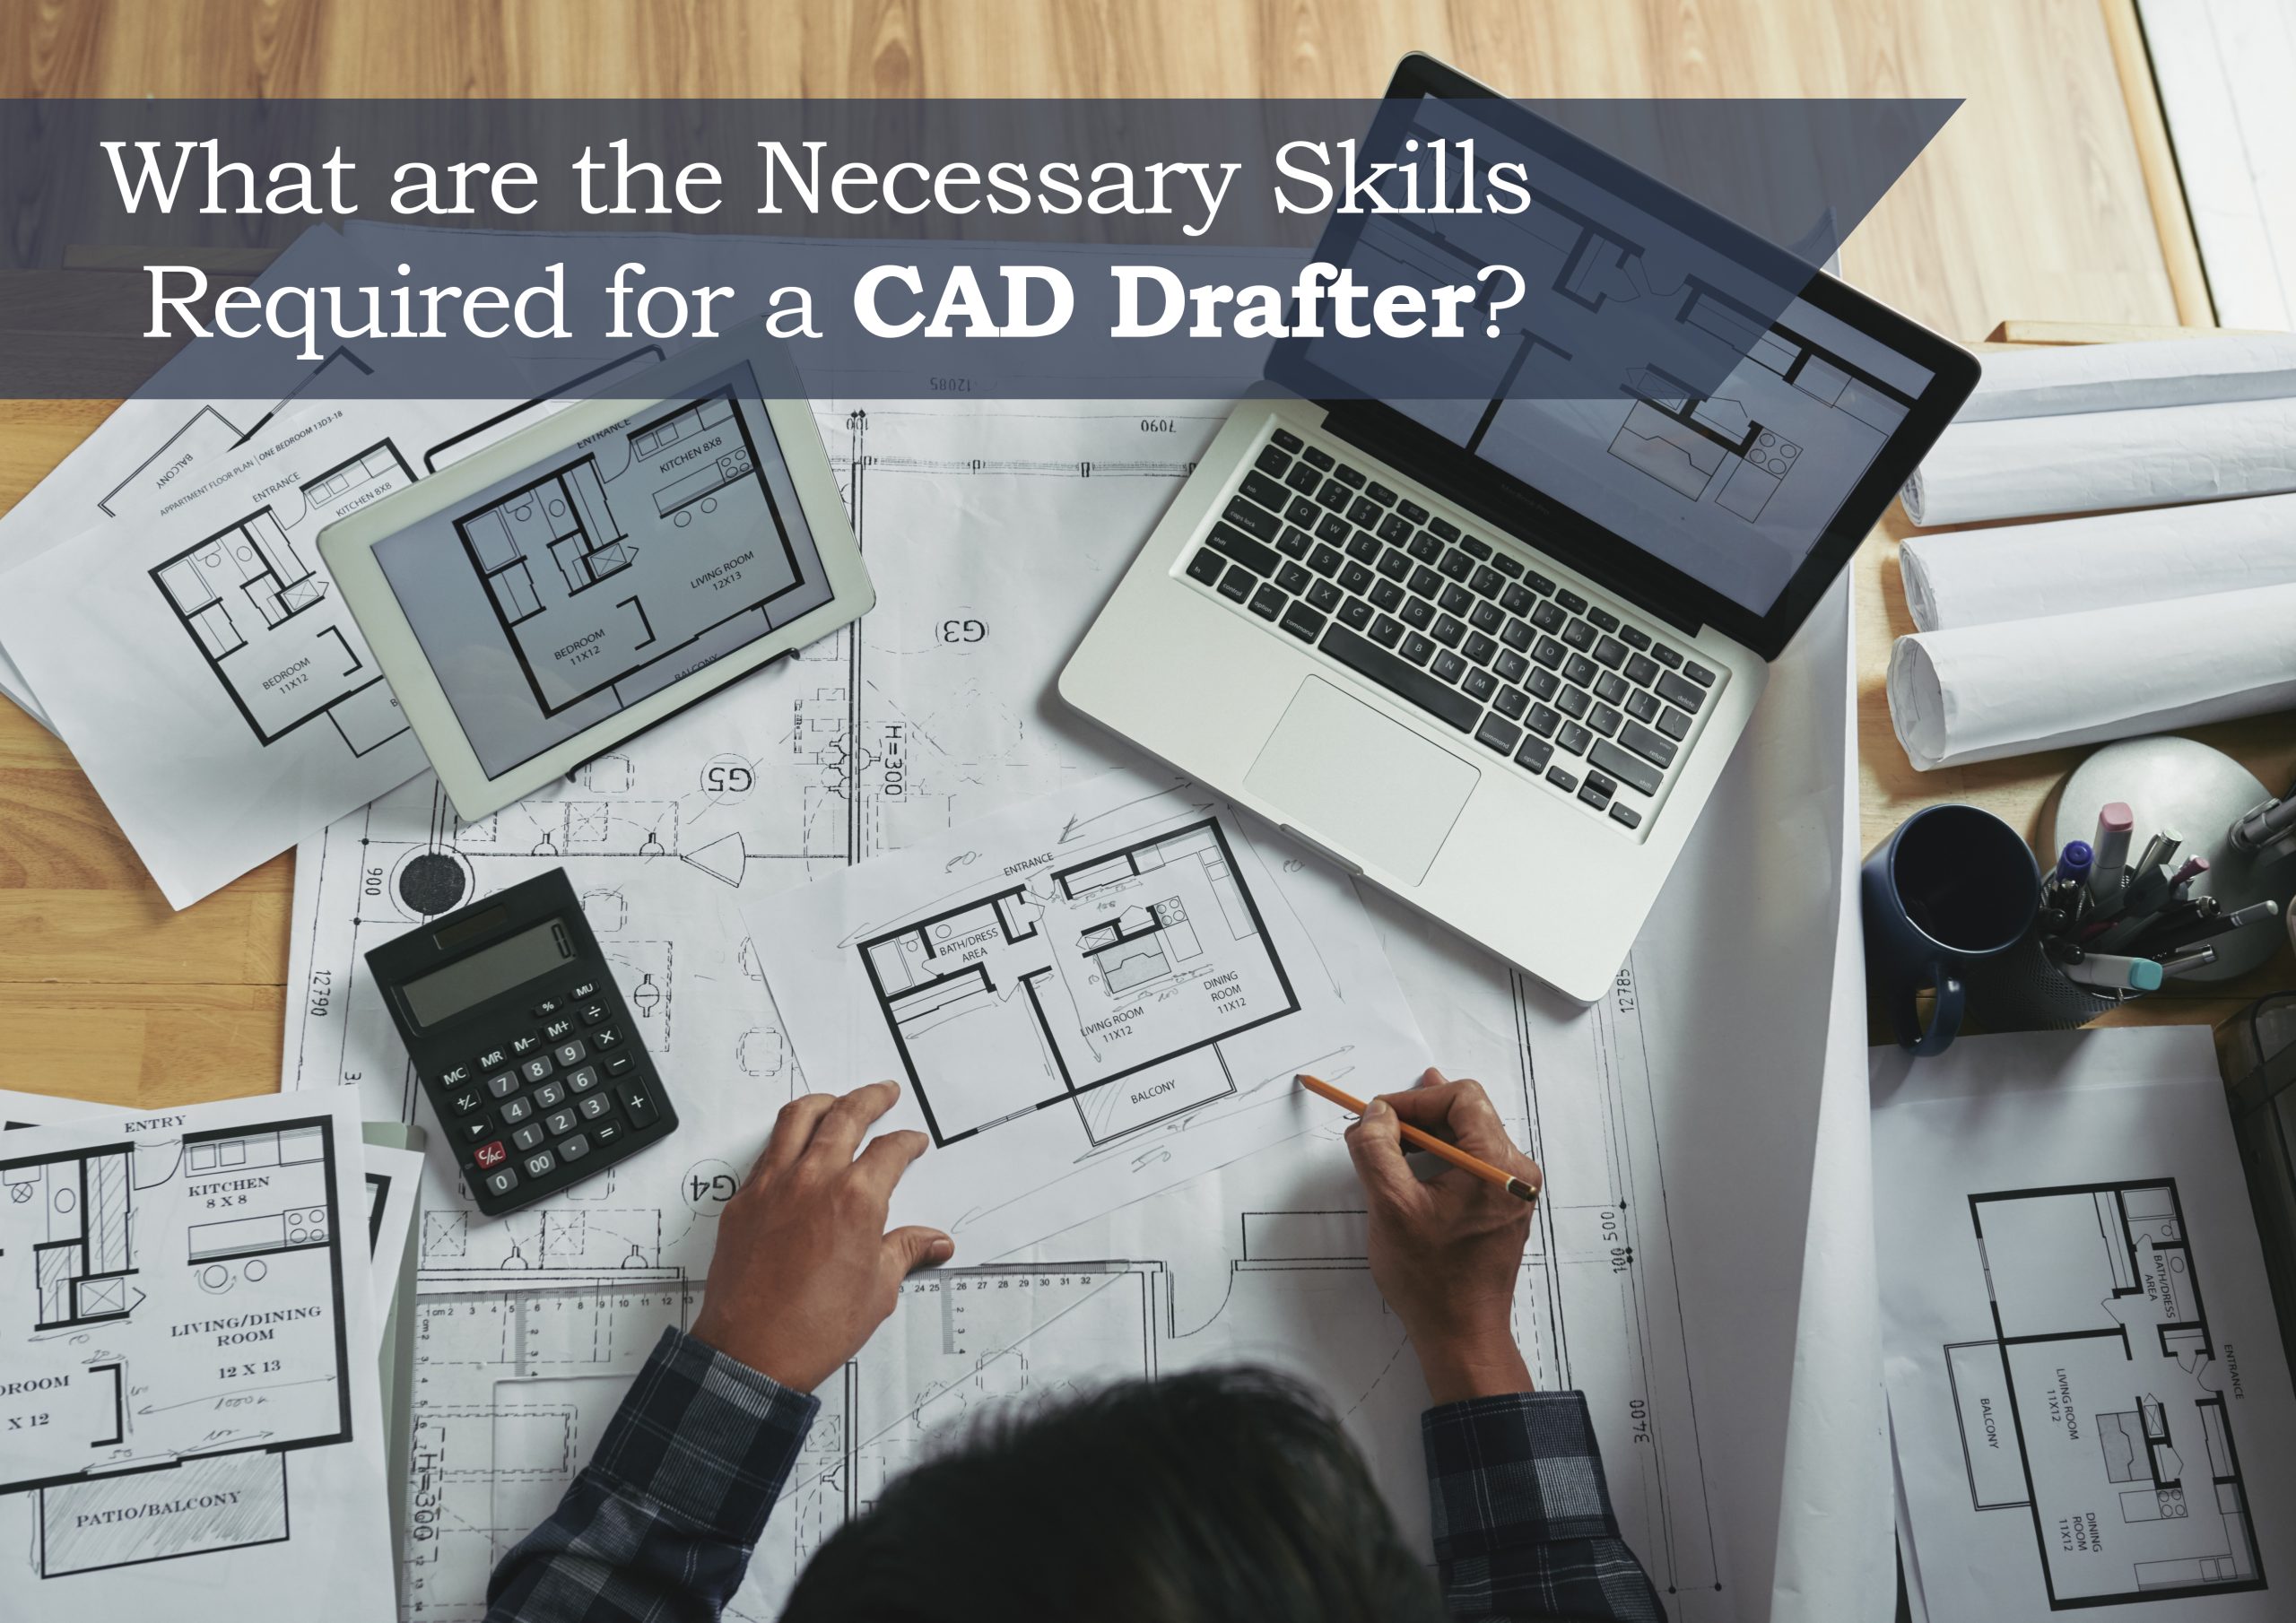 What are the Necessary Skills Required for a CAD Drafter?